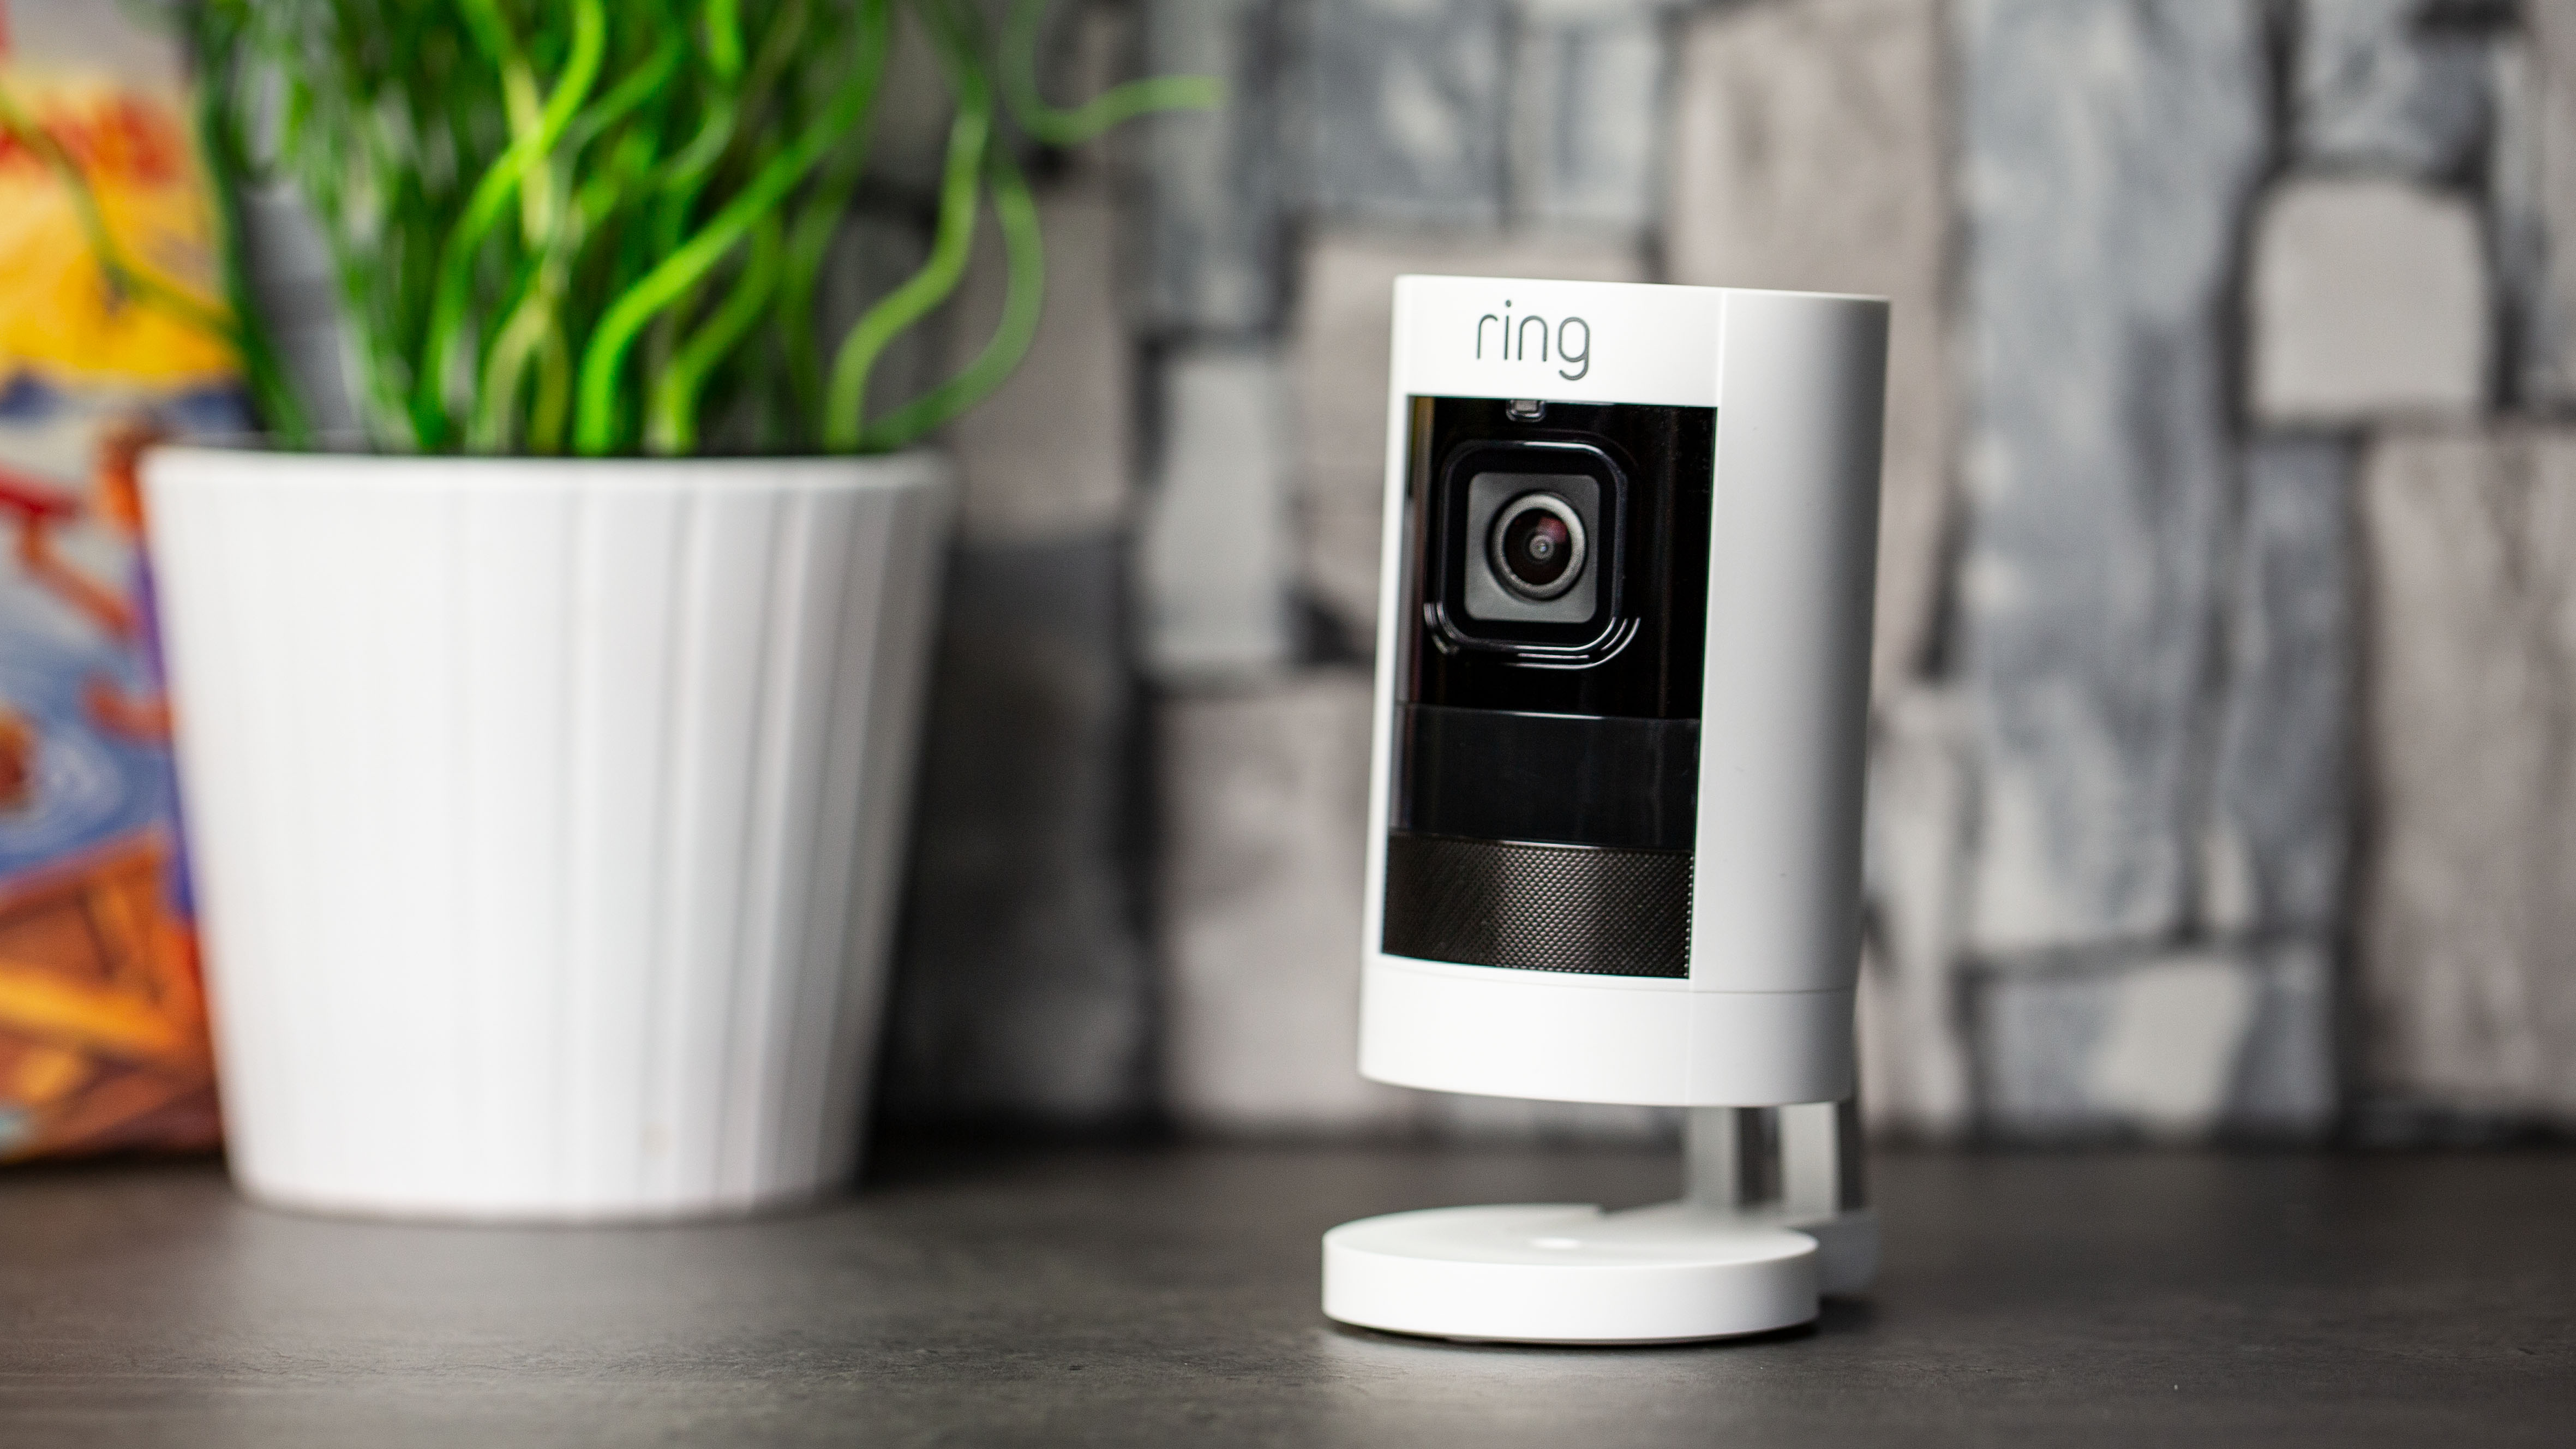 ring, stick up cam battery, security camera, wireless camera.